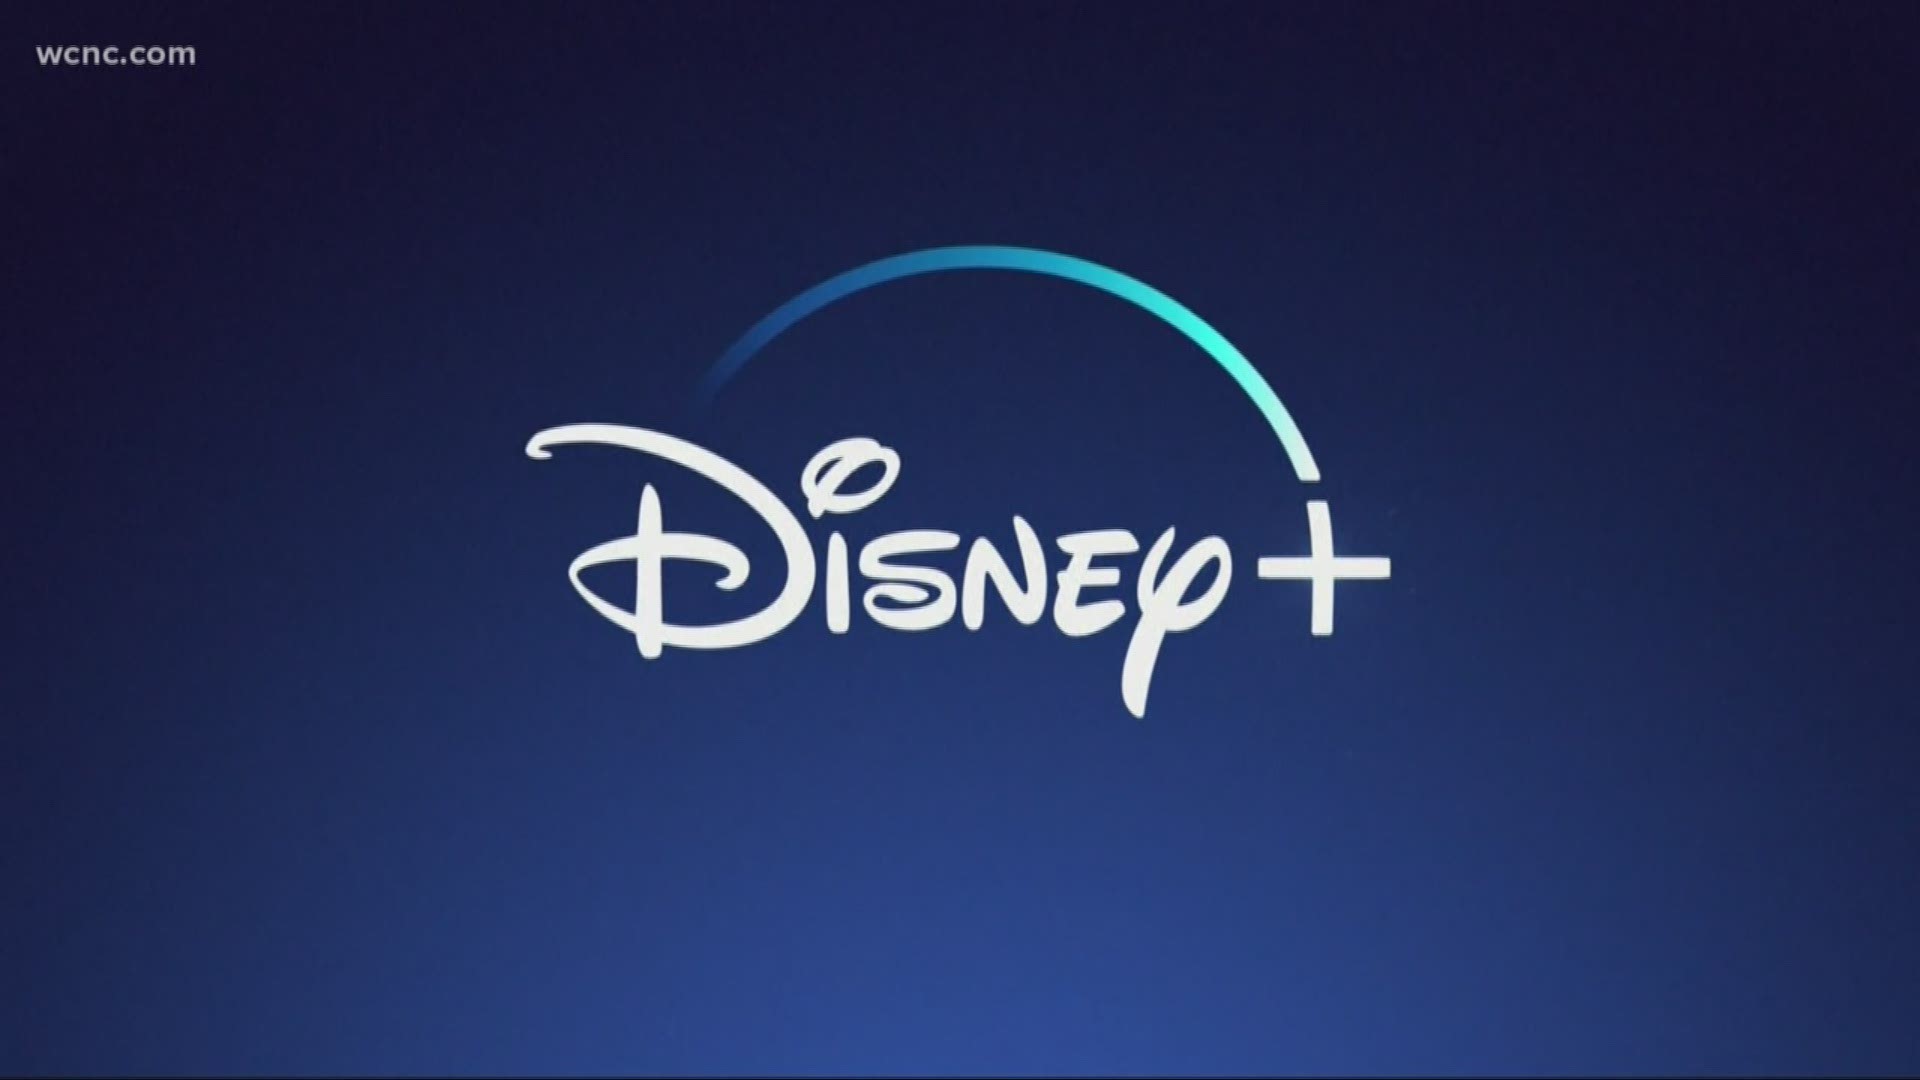 Less than one week after launch, Disney+ accounts are already being hacked.